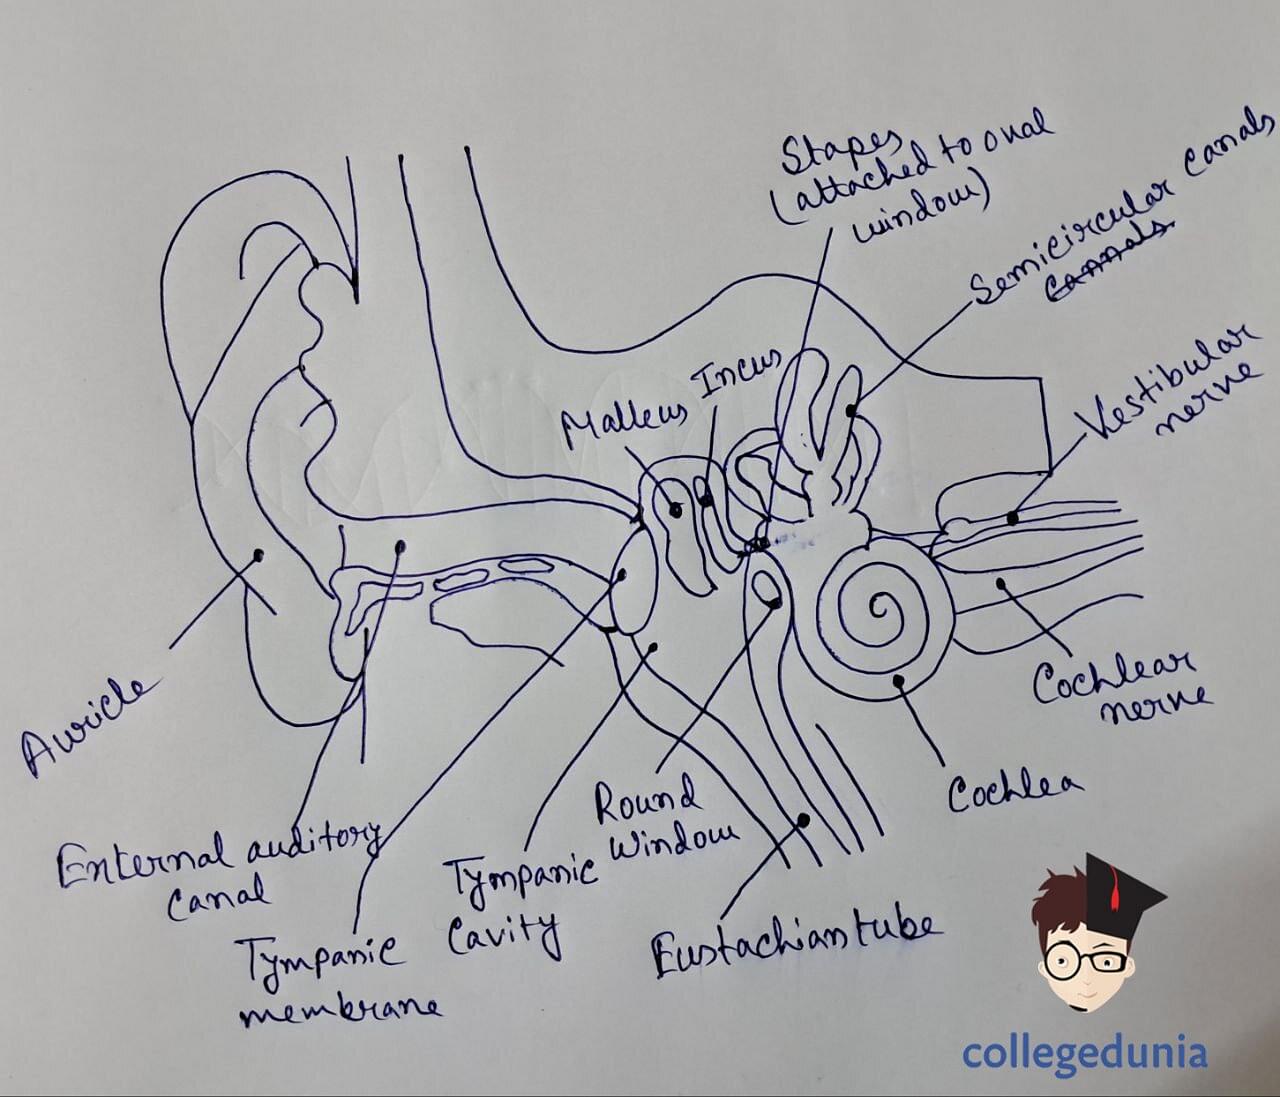 How To Draw Parts Of The Human Ear 👂 step by step for beginners - YouTube  | Human ear diagram, Ear diagram, Human ear anatomy